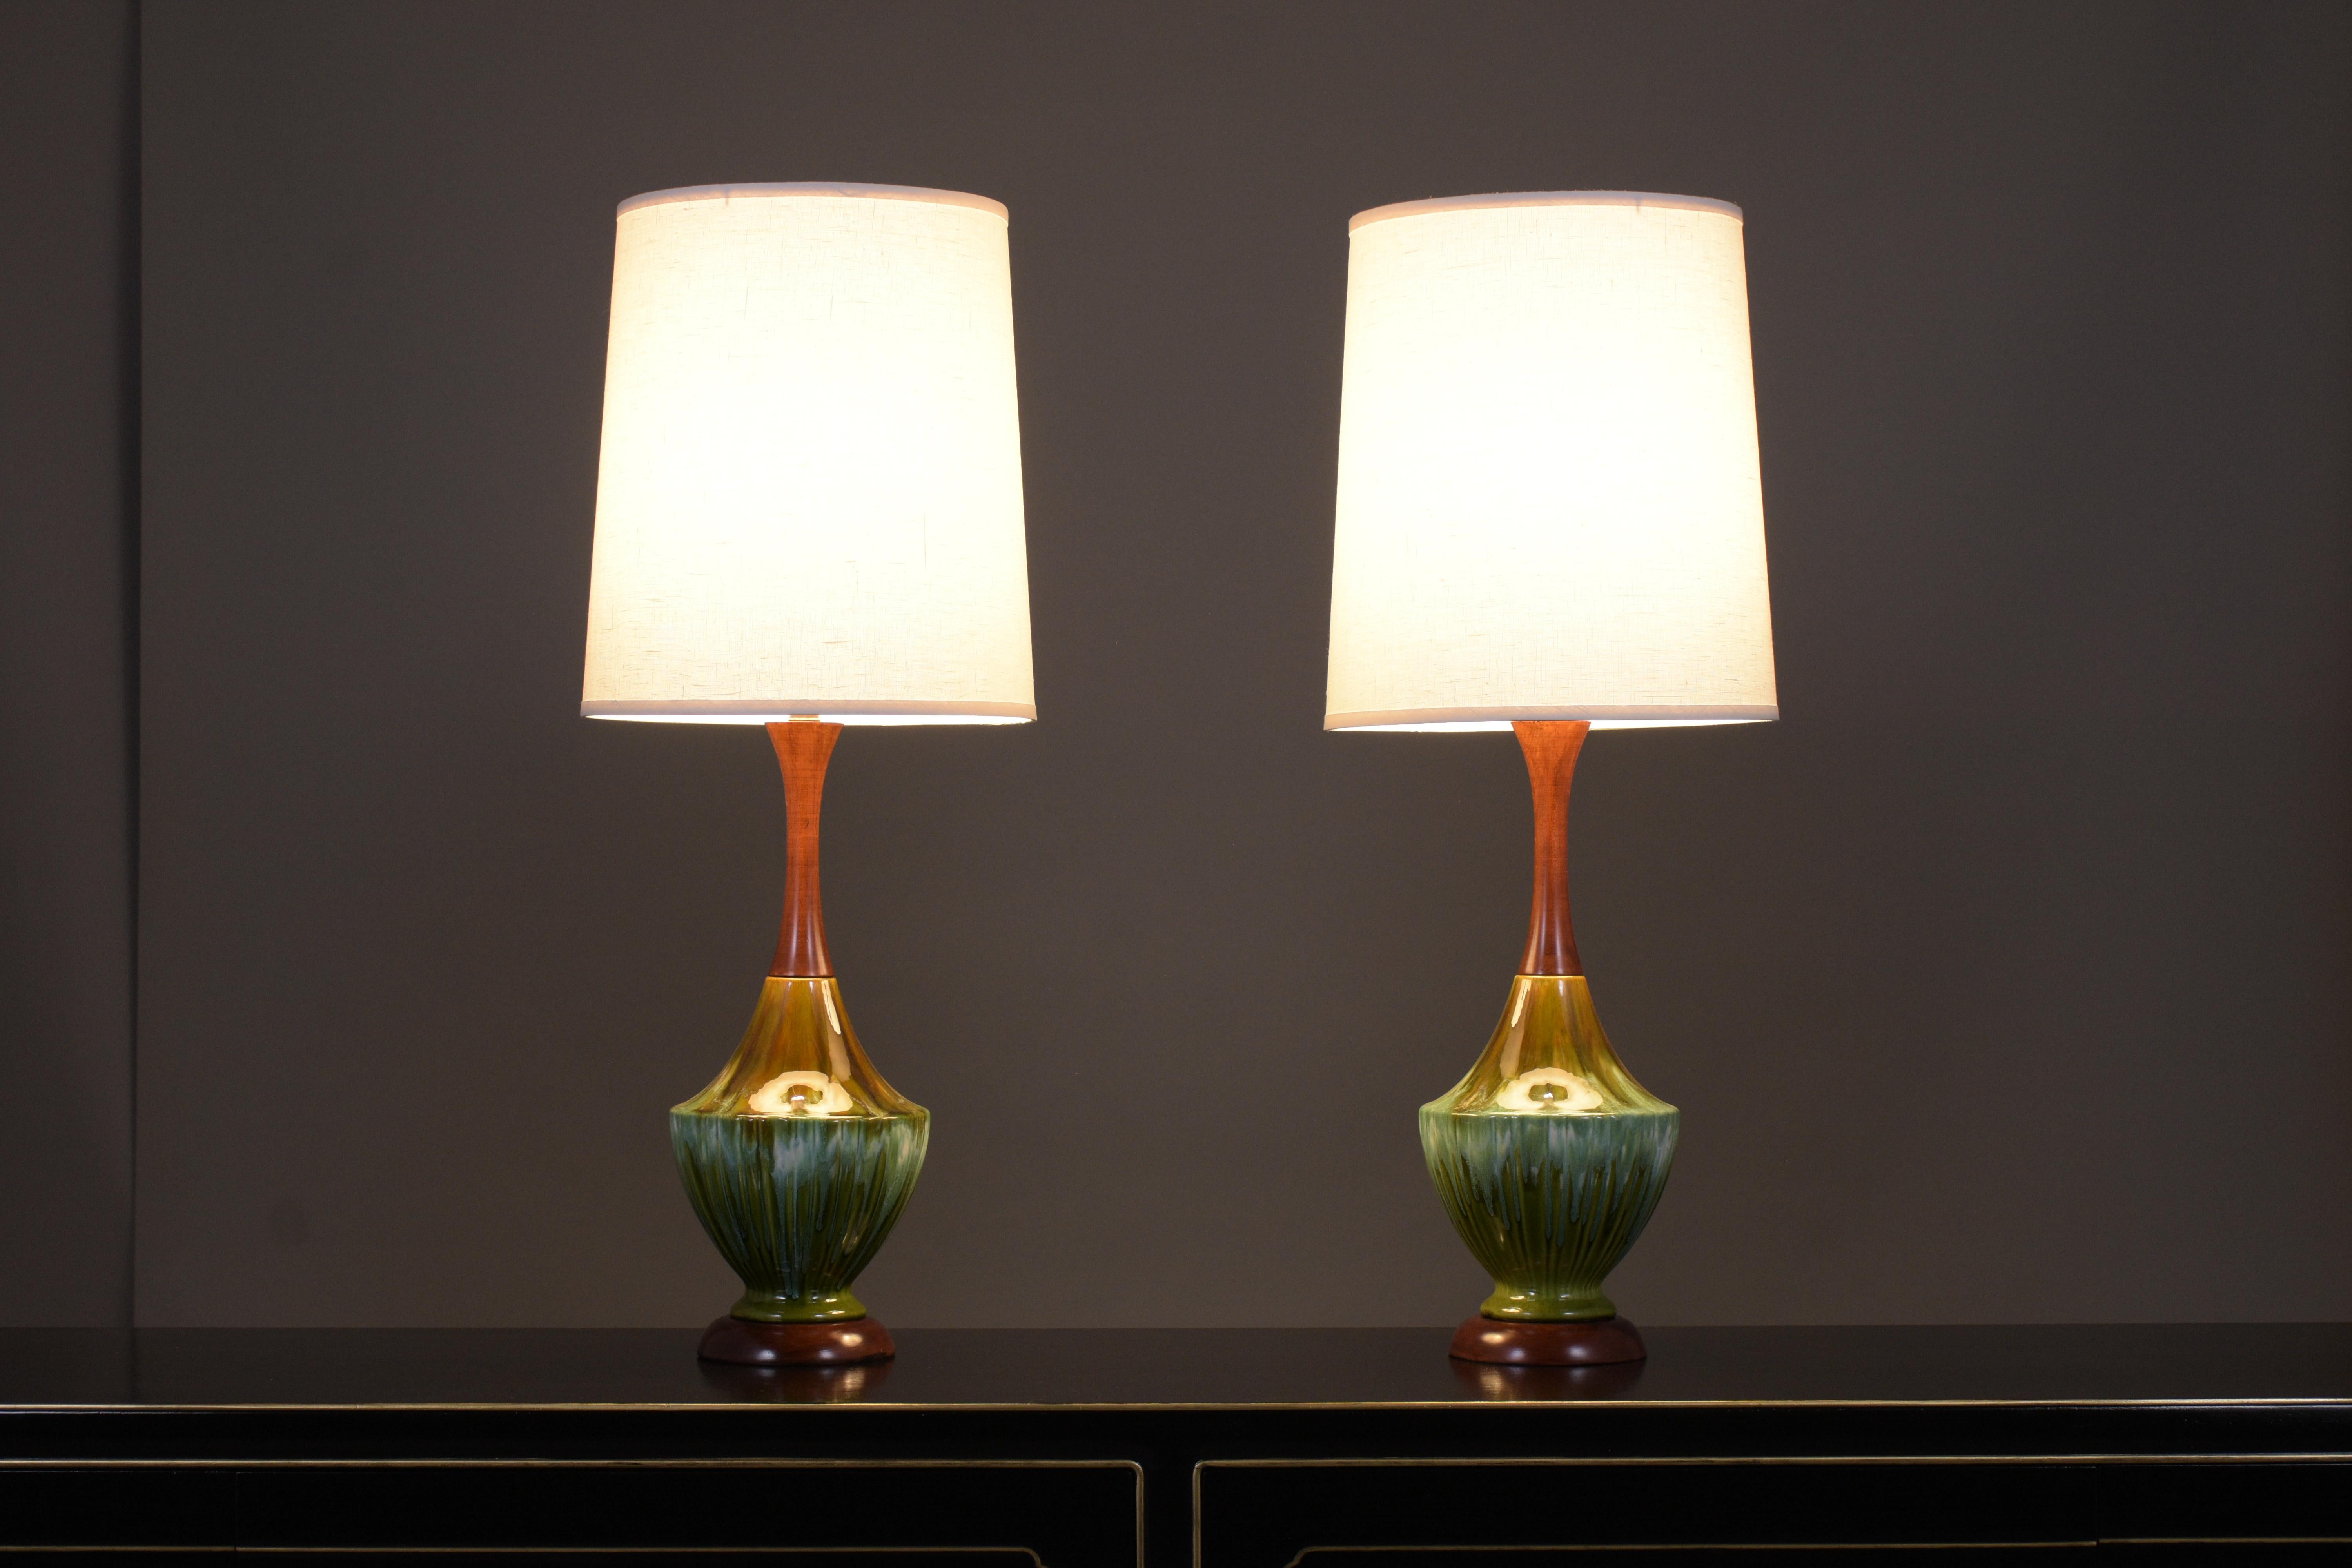 An extraordinary pair of 1960s mid-century table lamps that feature a porcelain vase painted in a green and amber color combination with a beautiful glazed finish. The lamp sits on a carved circular base in mahogany color with a lacquer finish and